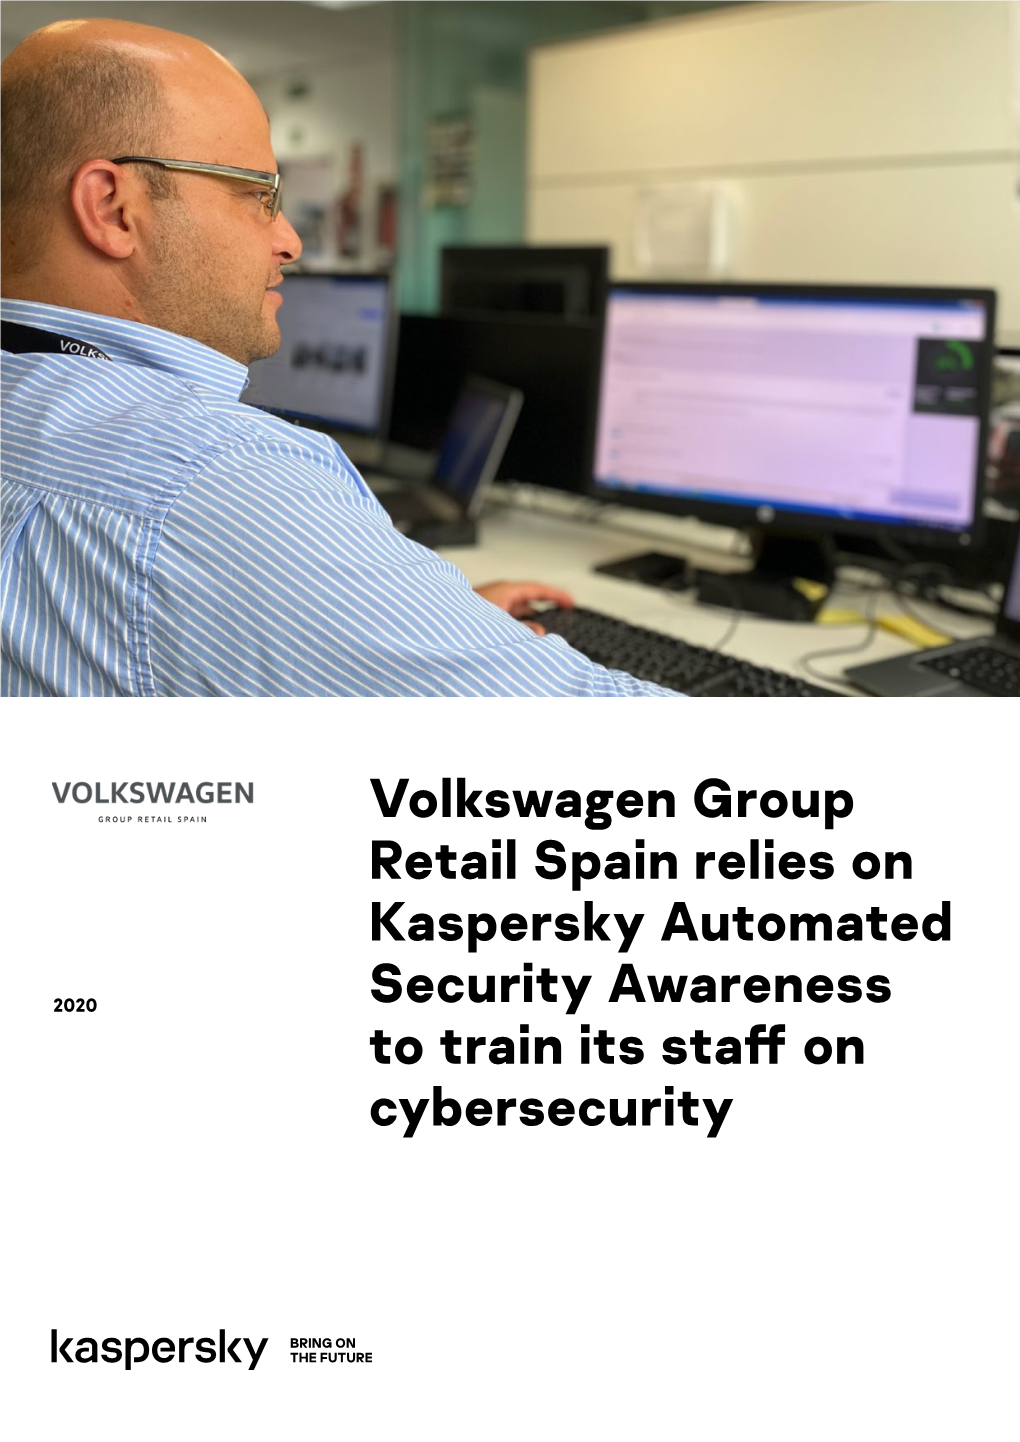 Volkswagen Group Retail Spain Relies on Kaspersky Automated Security Awareness to Train Its Staff on Cybersecurity